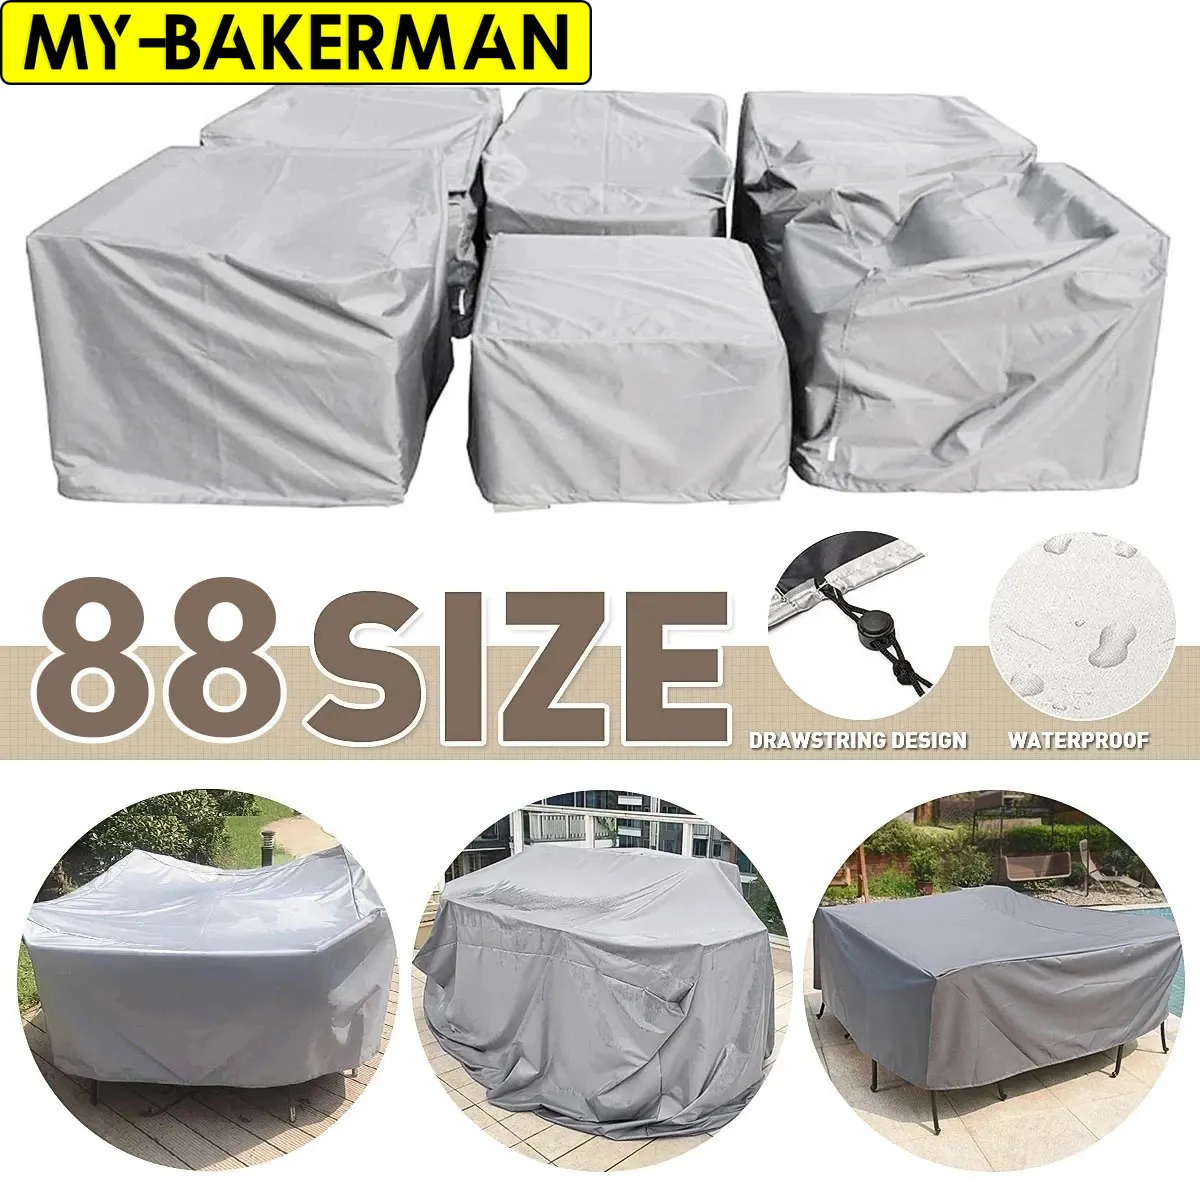 2 Colors Waterproof Outdoor Patio Garden Furniture Covers Rain Snow Chair covers for Sofa Table Chair Dust Proof Cover